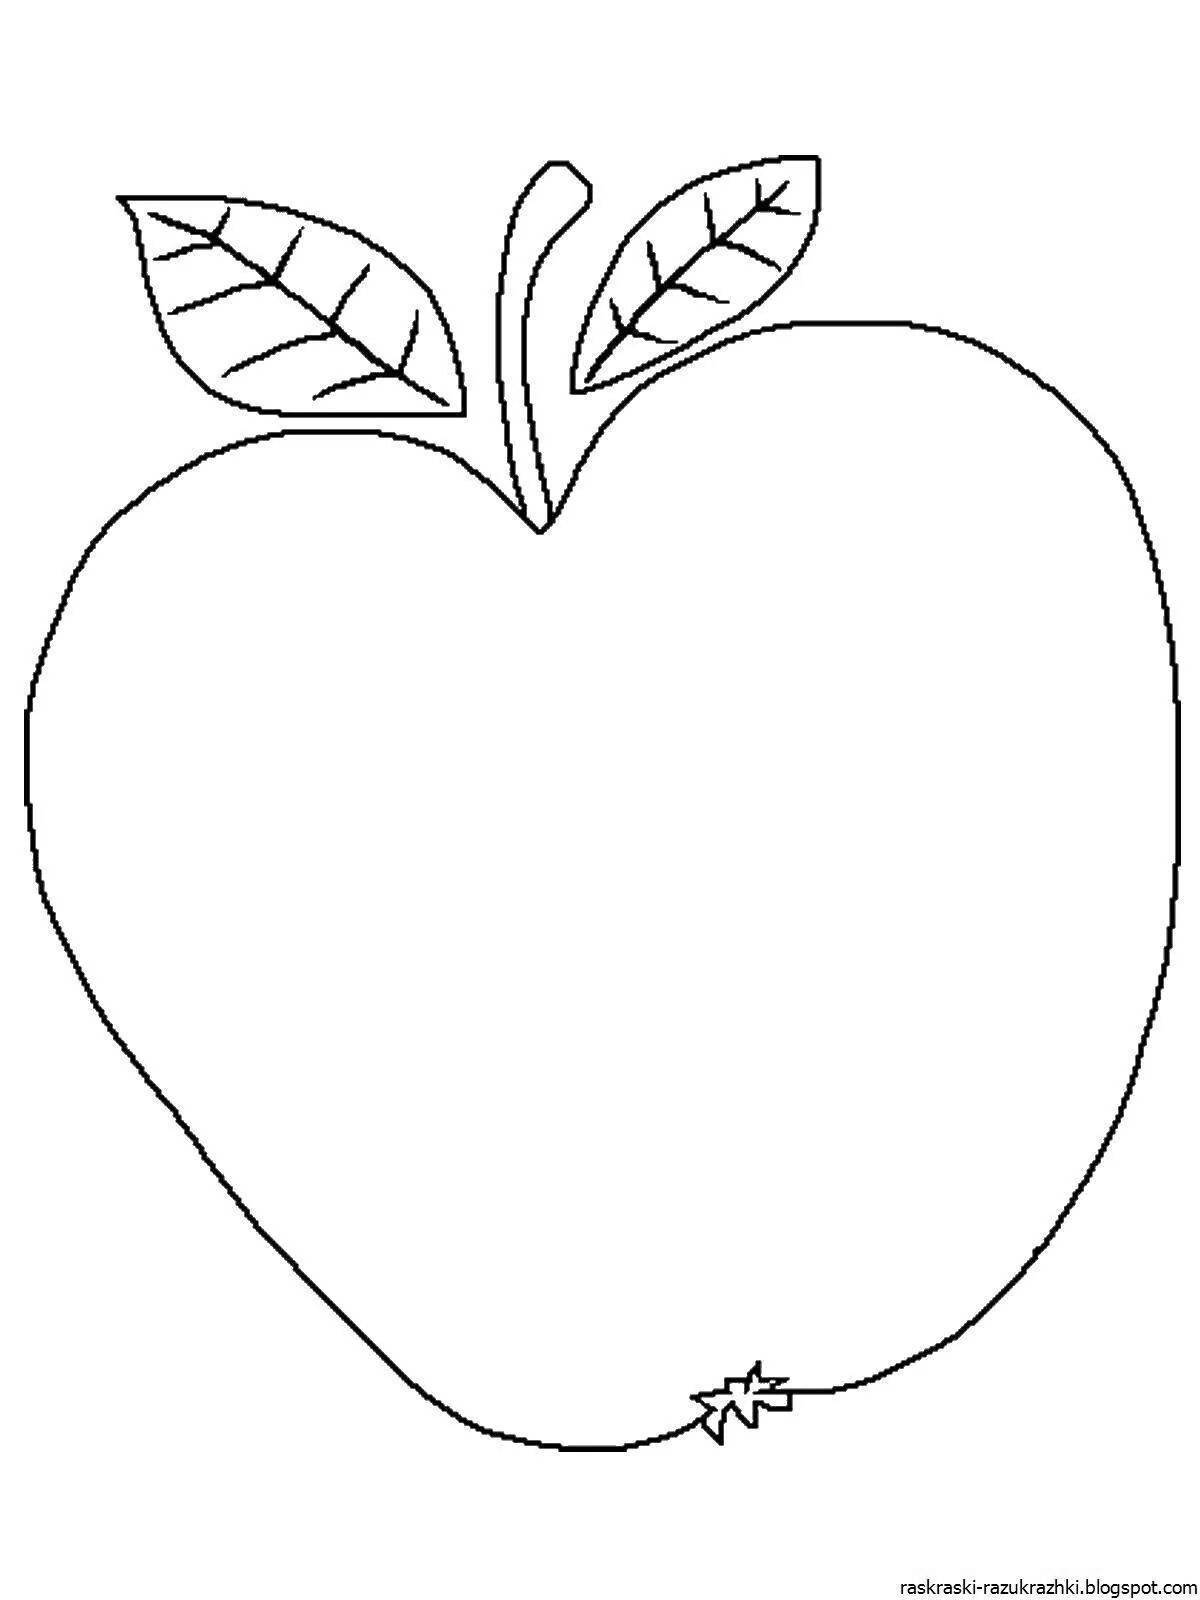 Coloring pages with cute berries and fruits for kids